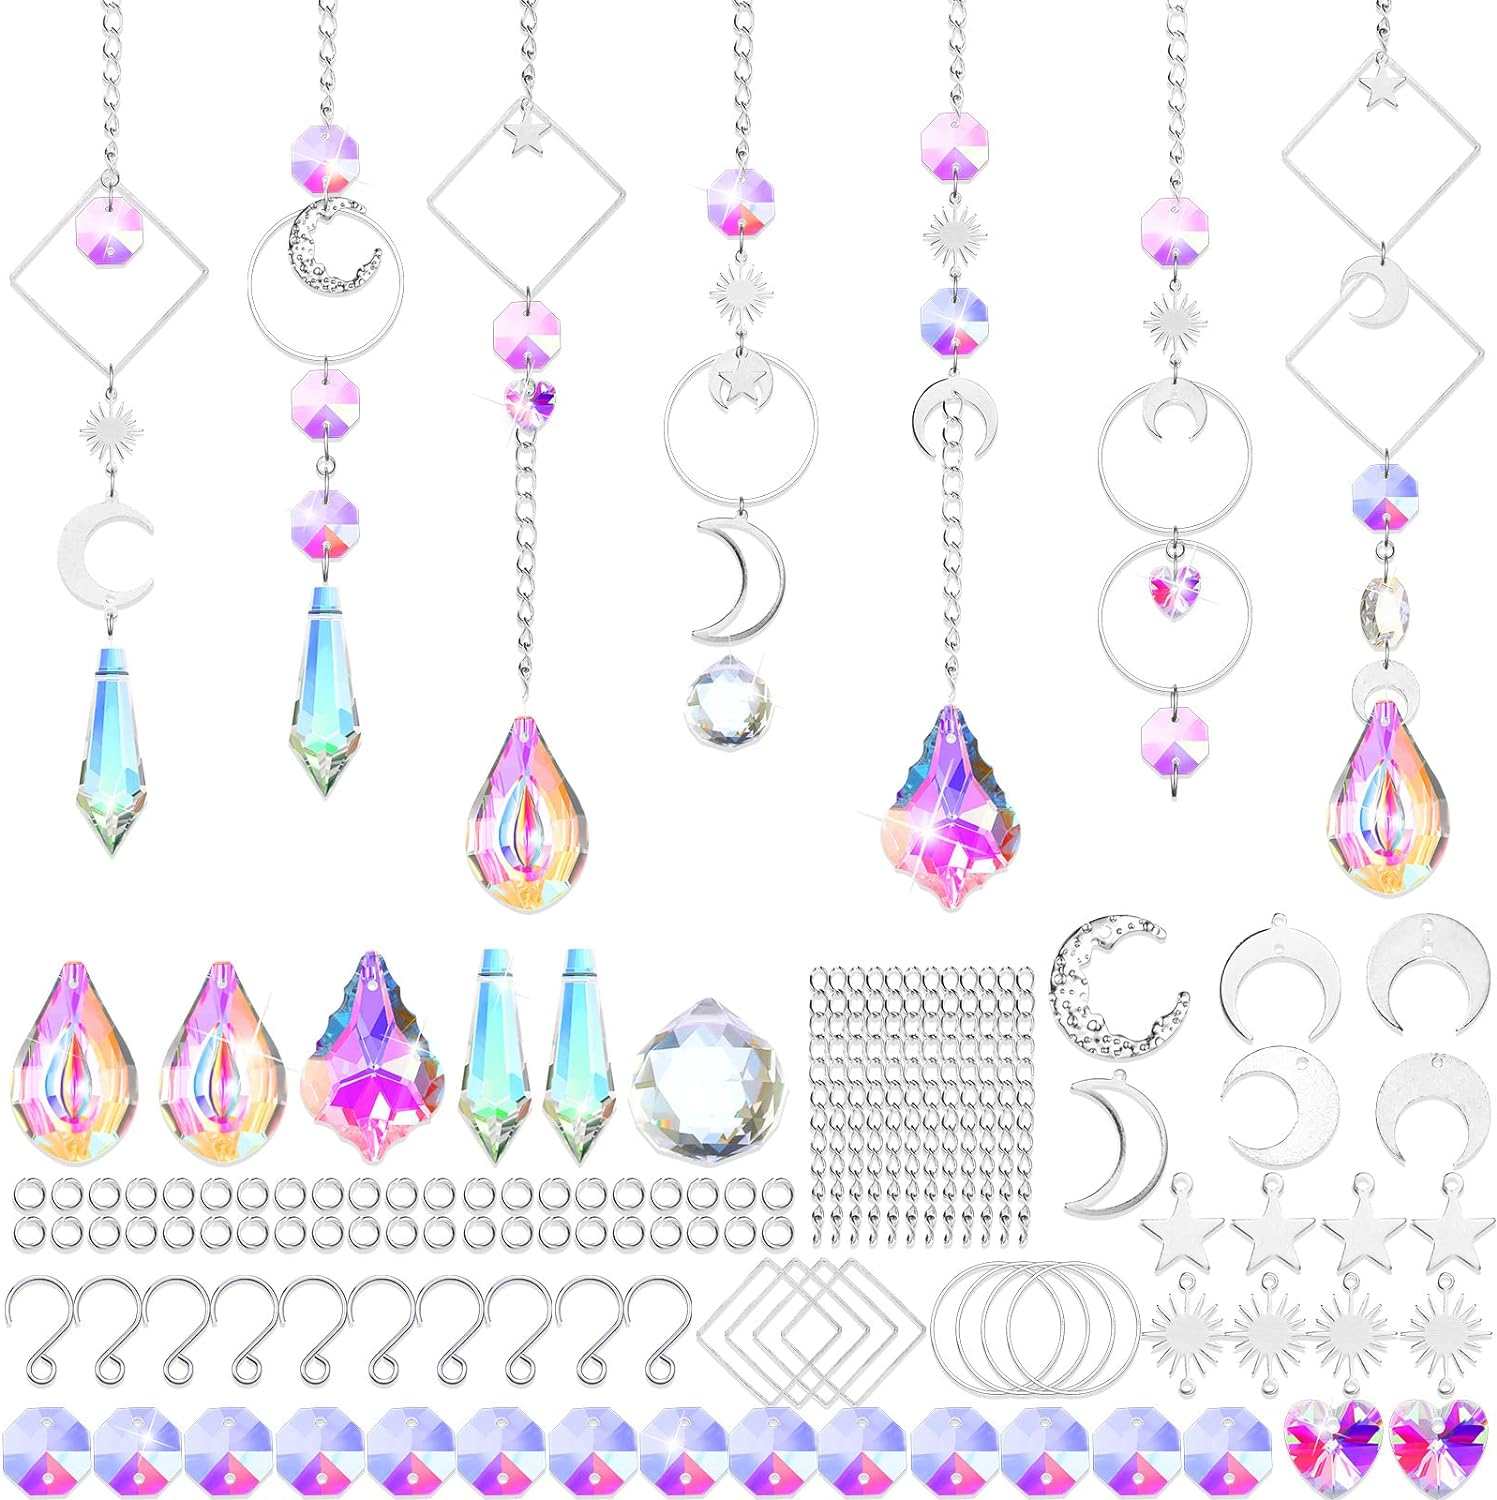 57 Pcs Crystal Suncatcher Hanging Sun Catcher Kits for Adults Colorful Crystals Suncatchers Prisms with Chain Pendant Ornament Suncatchers DIY Crafts for Window Home Office Garden Decoration (Silver)